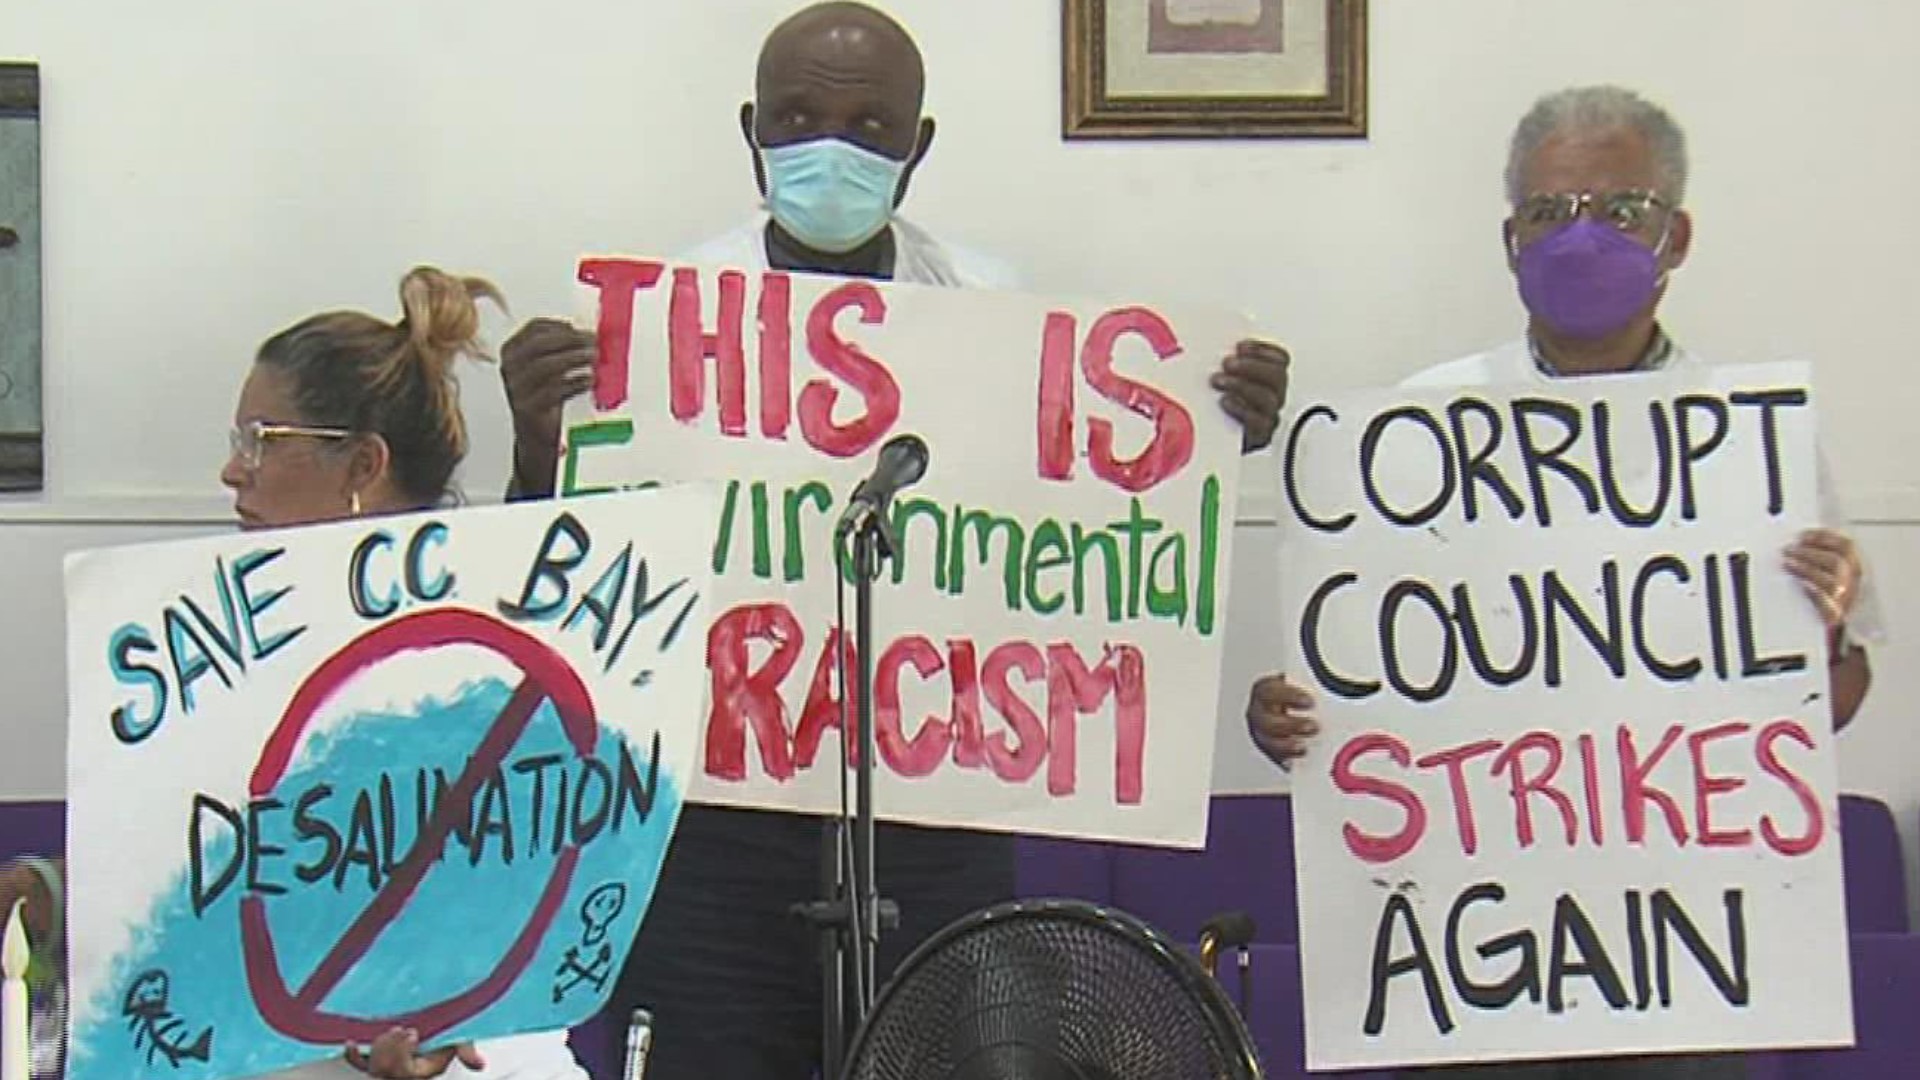 The Hillcrest Residents Association announced it's filing a civil rights complaint with the EPA.